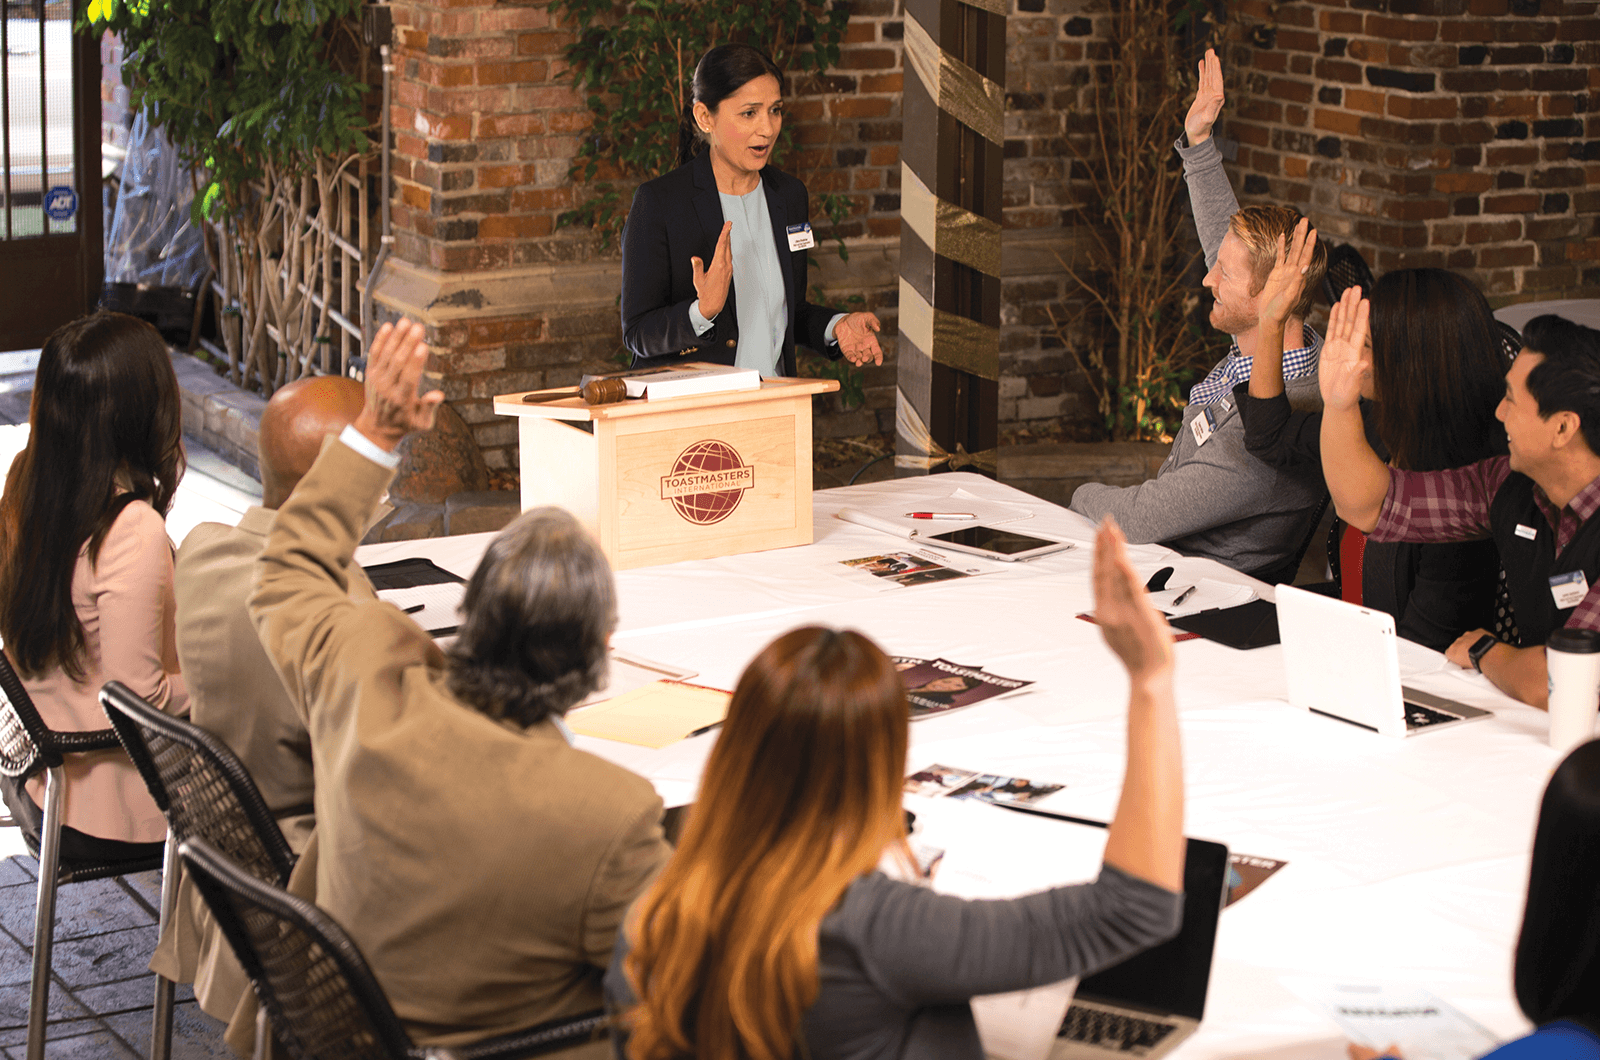 Female standing at Toastmasters lectern while members raise their hands